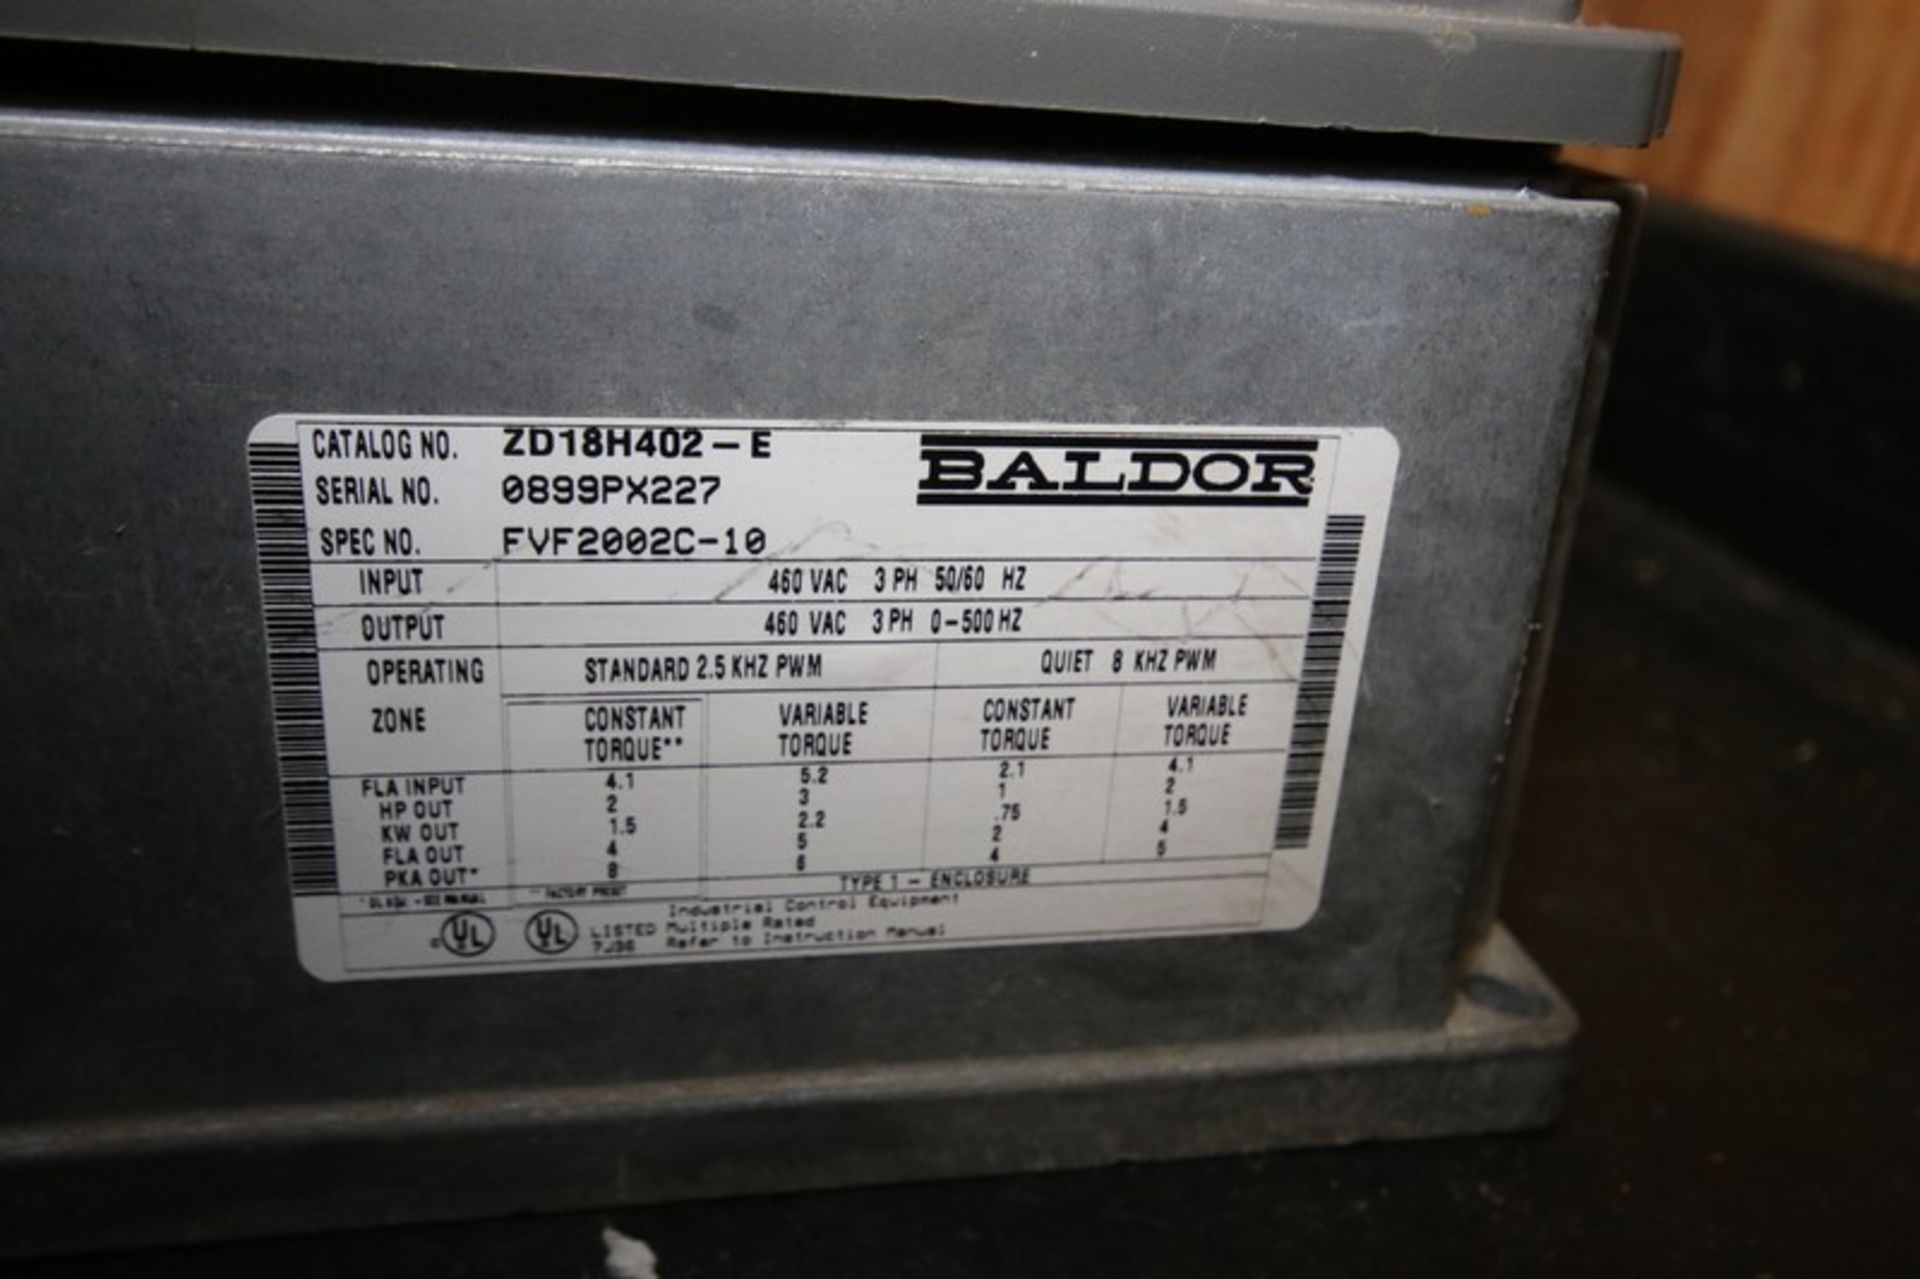 Baldor VFD, Cat. No. ZD15H402-E, SN0899PX227, 460V 3 Phase (INV#81488)(Located @ the MDG Auction - Image 2 of 2